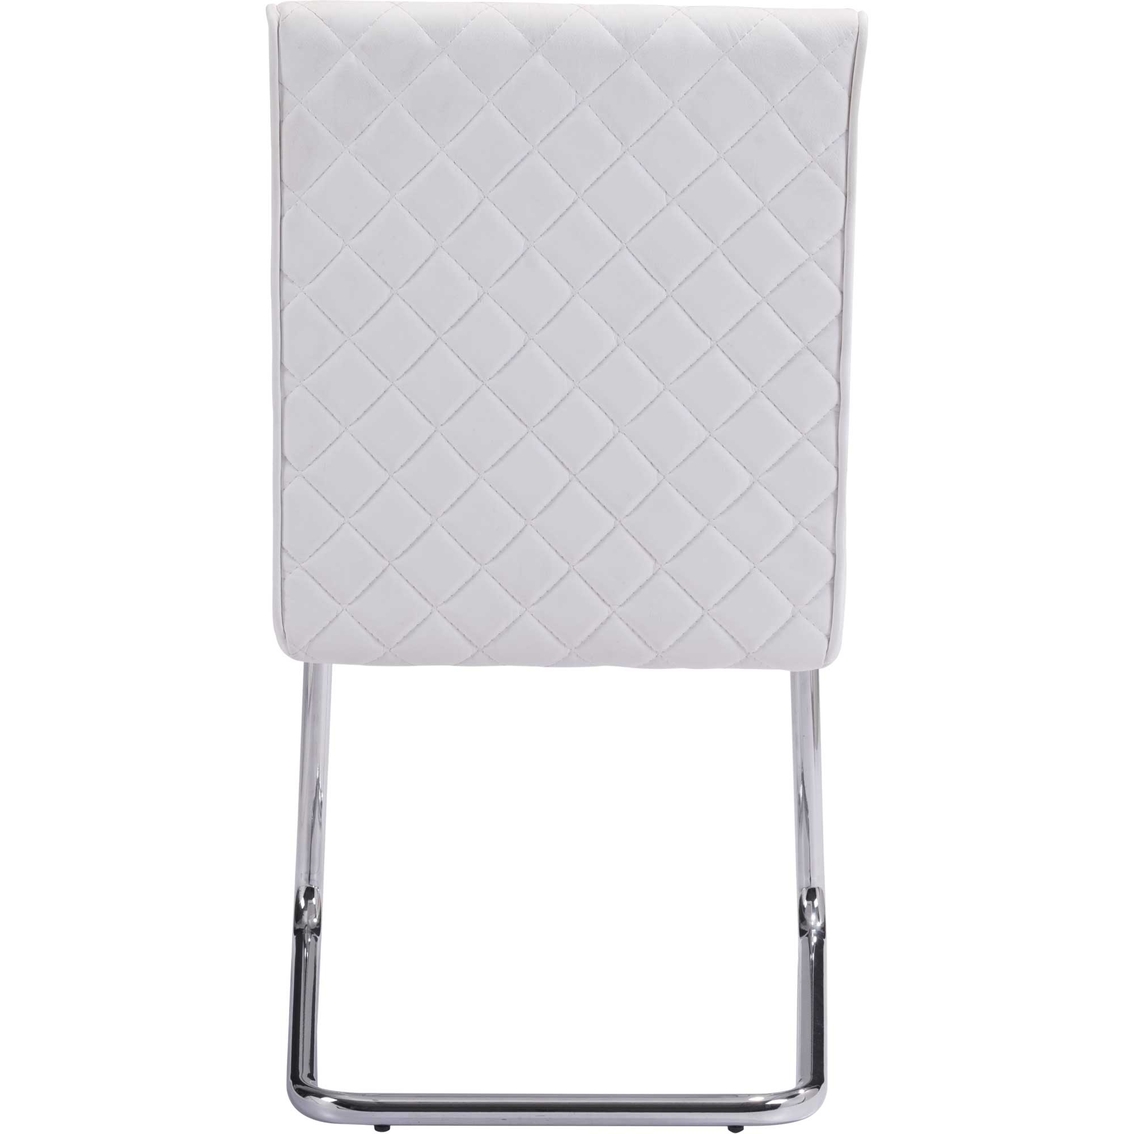 Zuo Modern Quilt Armless Dining Chair 2 Pk. - Image 4 of 8